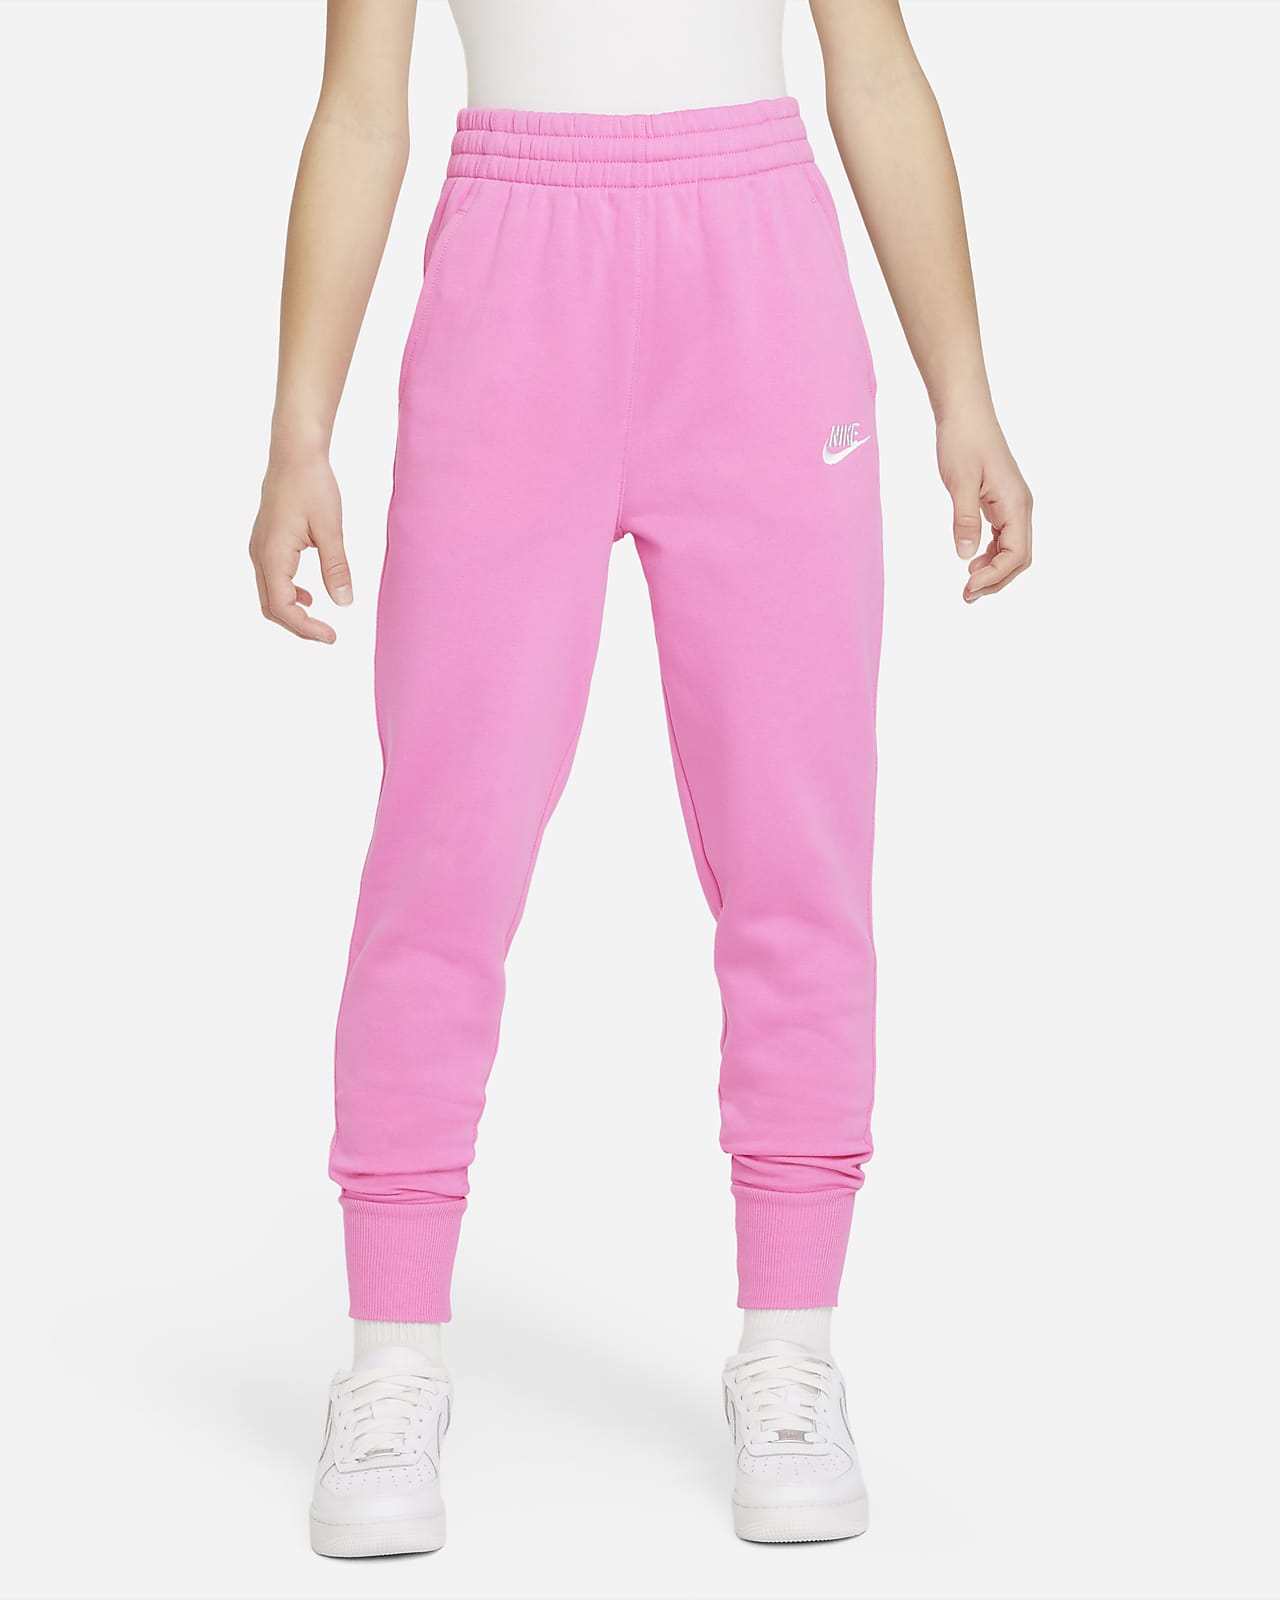 Nike girls trousers compare prices and buy online